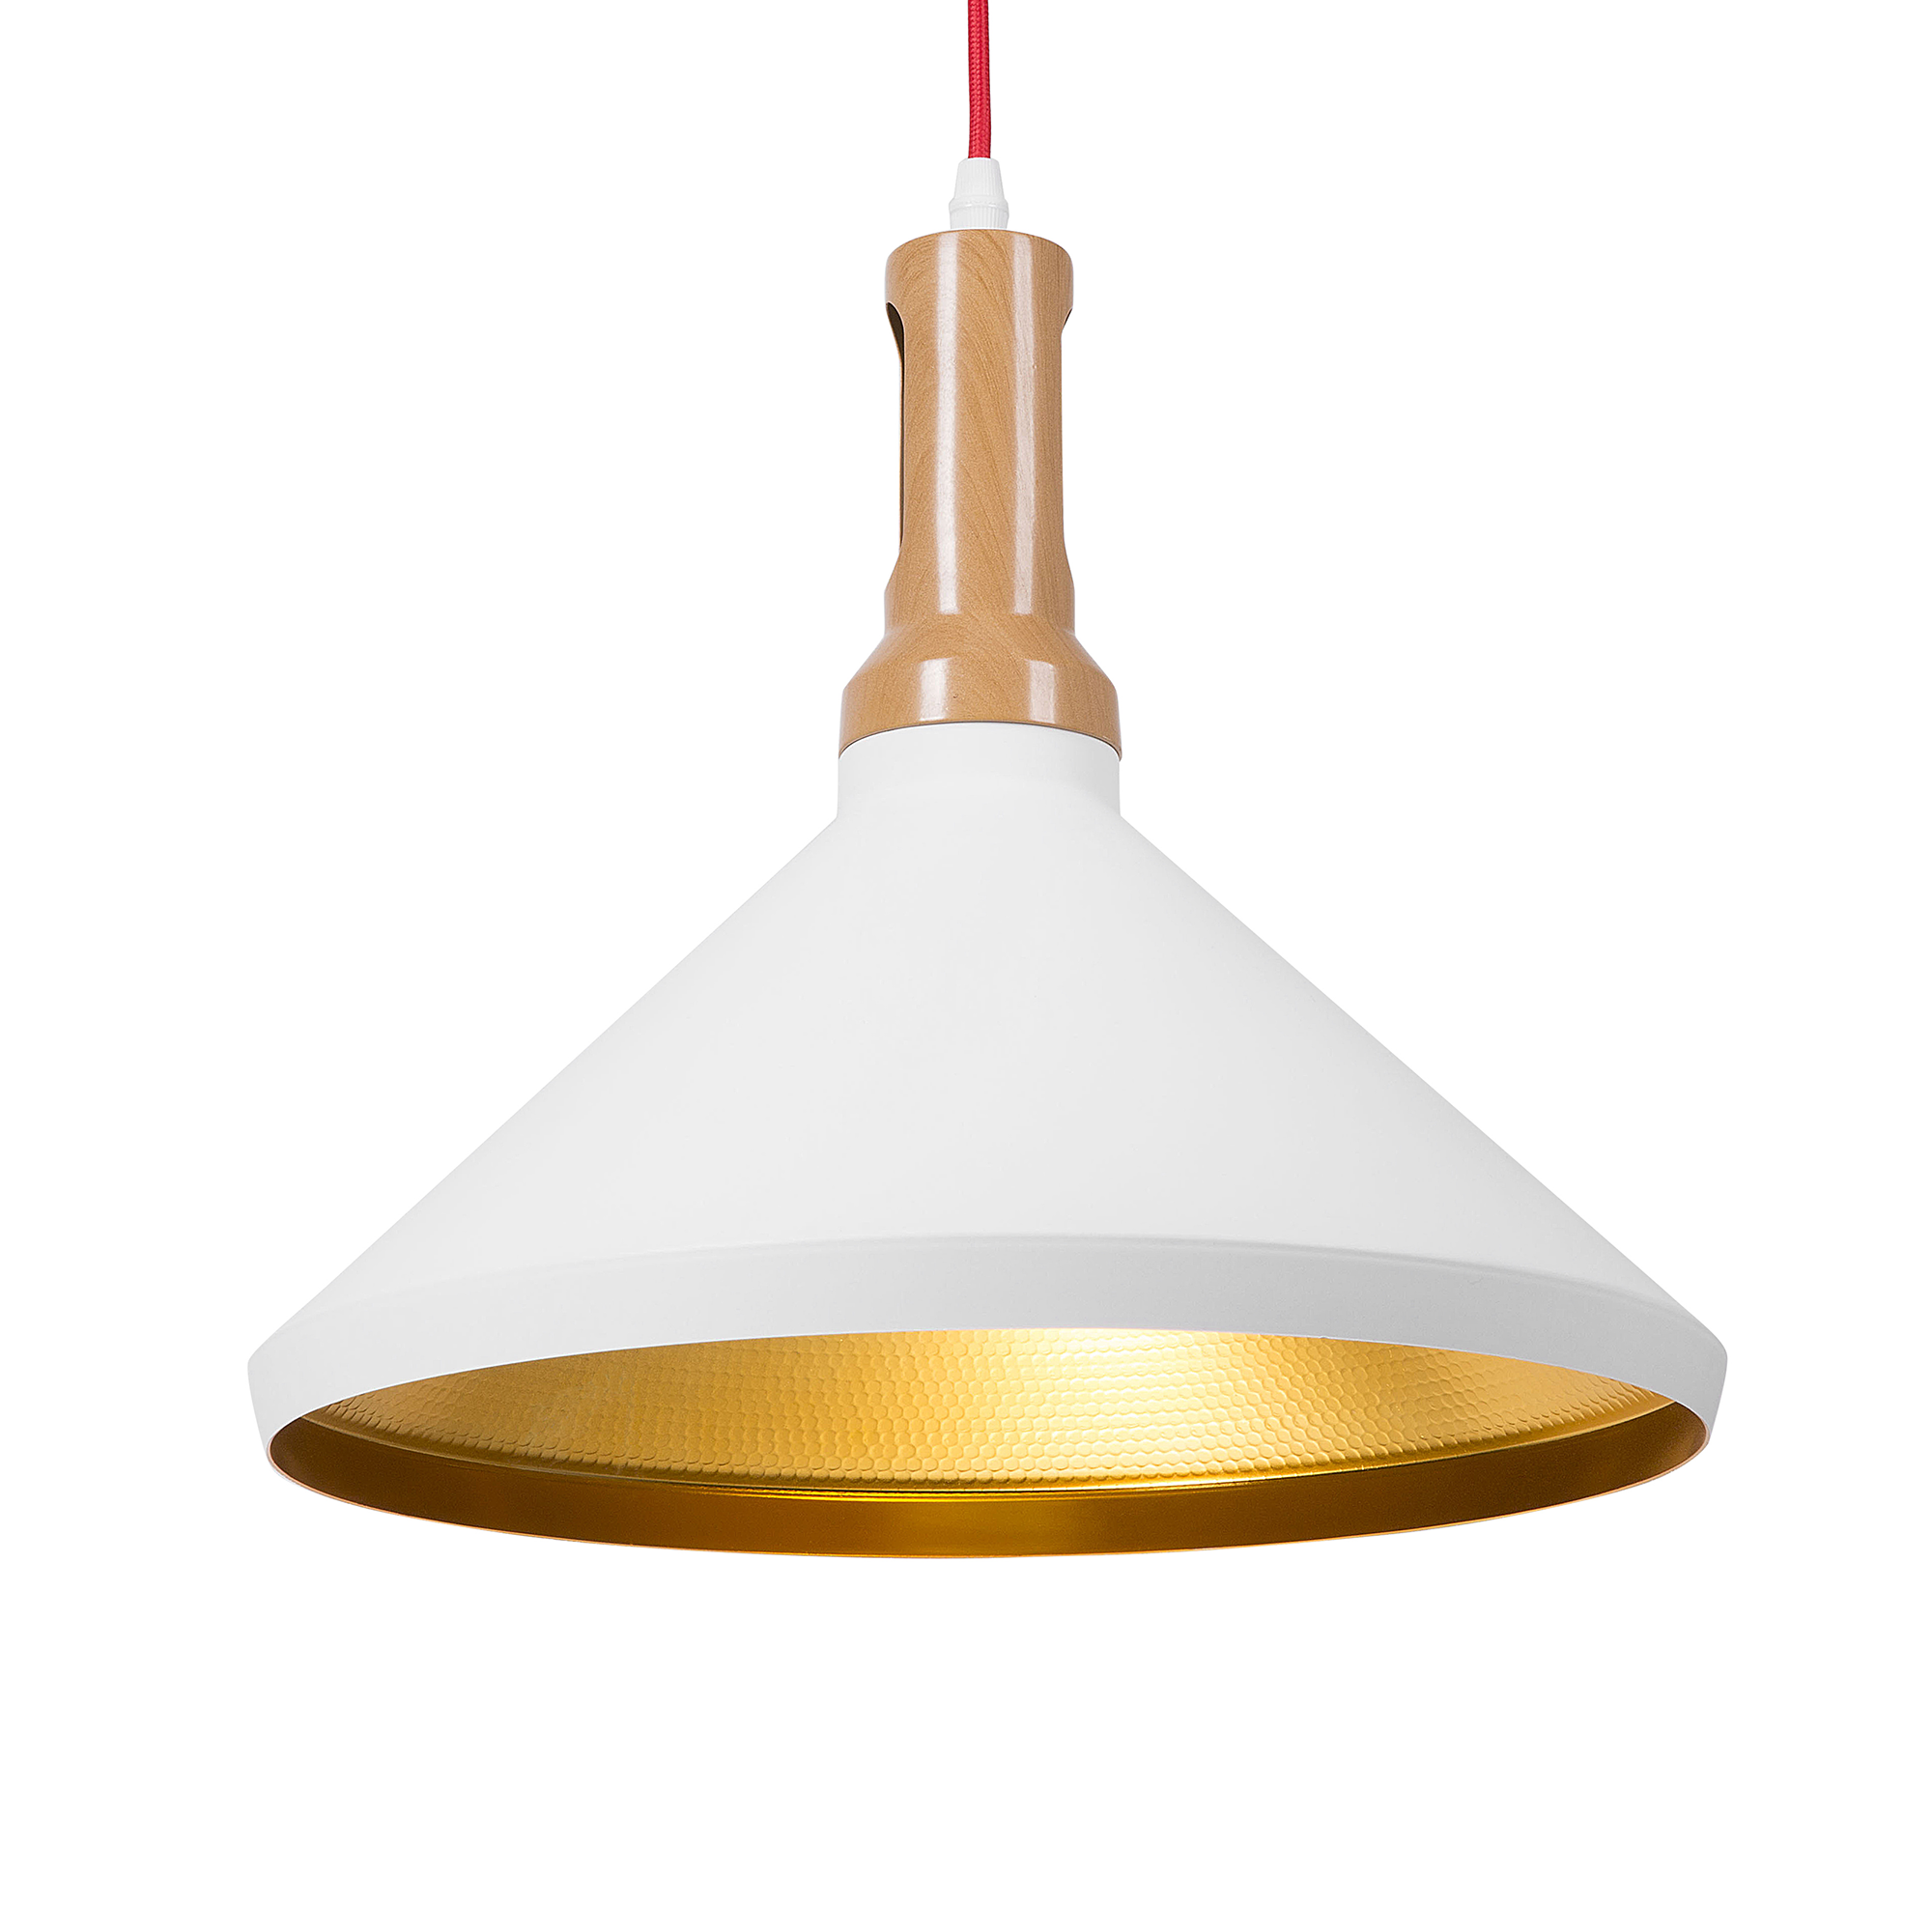 Beliani Hanging Light Pendant Lamp Withe with Gold and Light Wood Aluminium Cone Shade Industrial Design